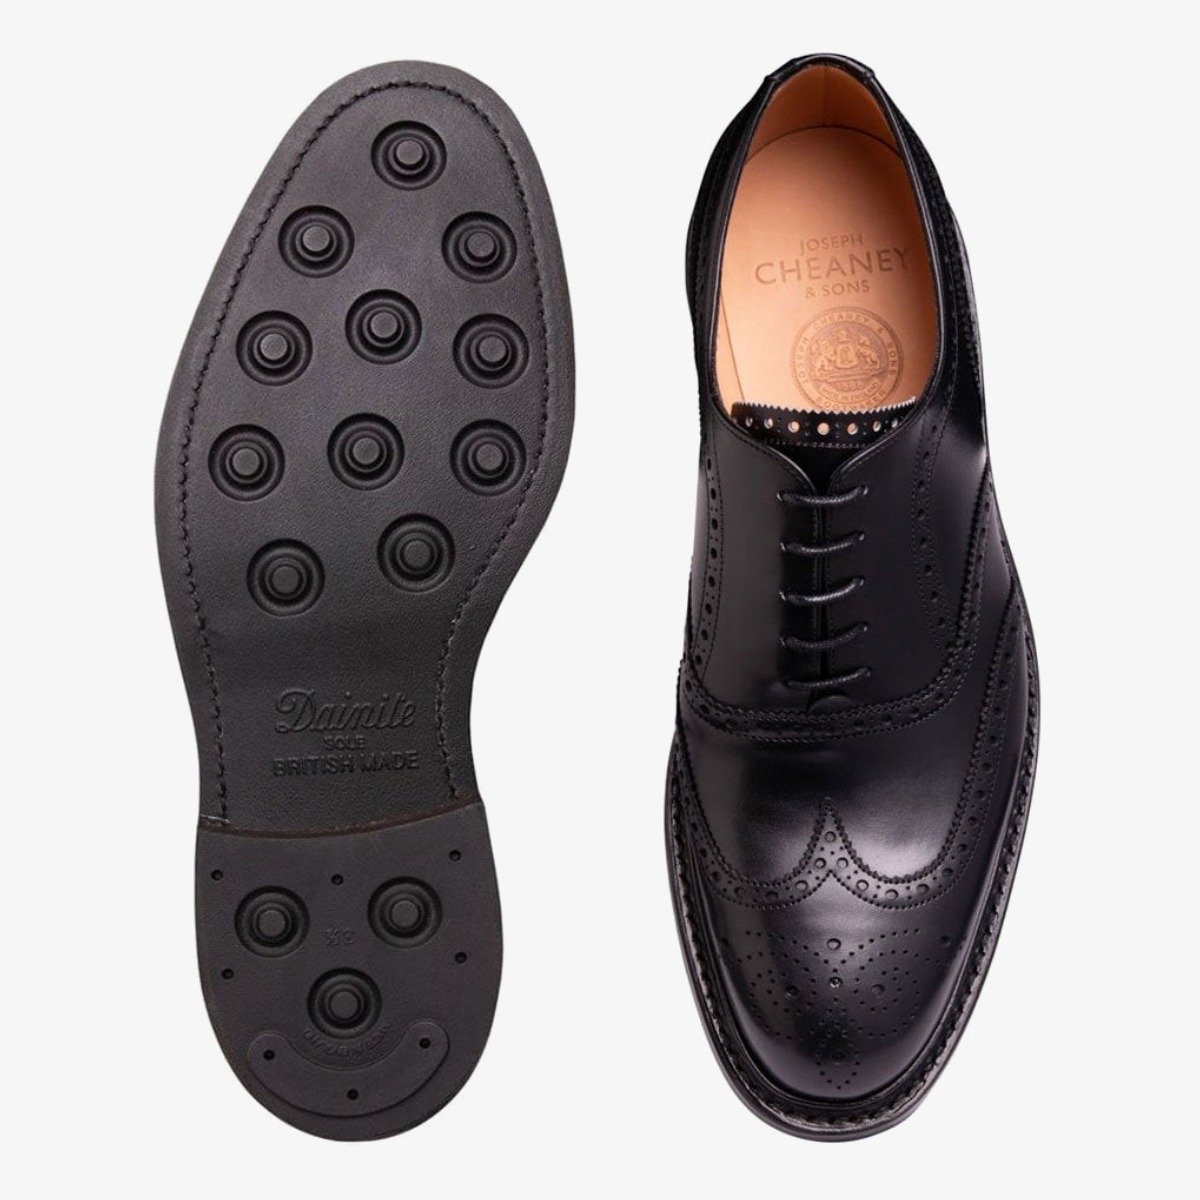 Cheaney Hythe II black brogue oxford shoes